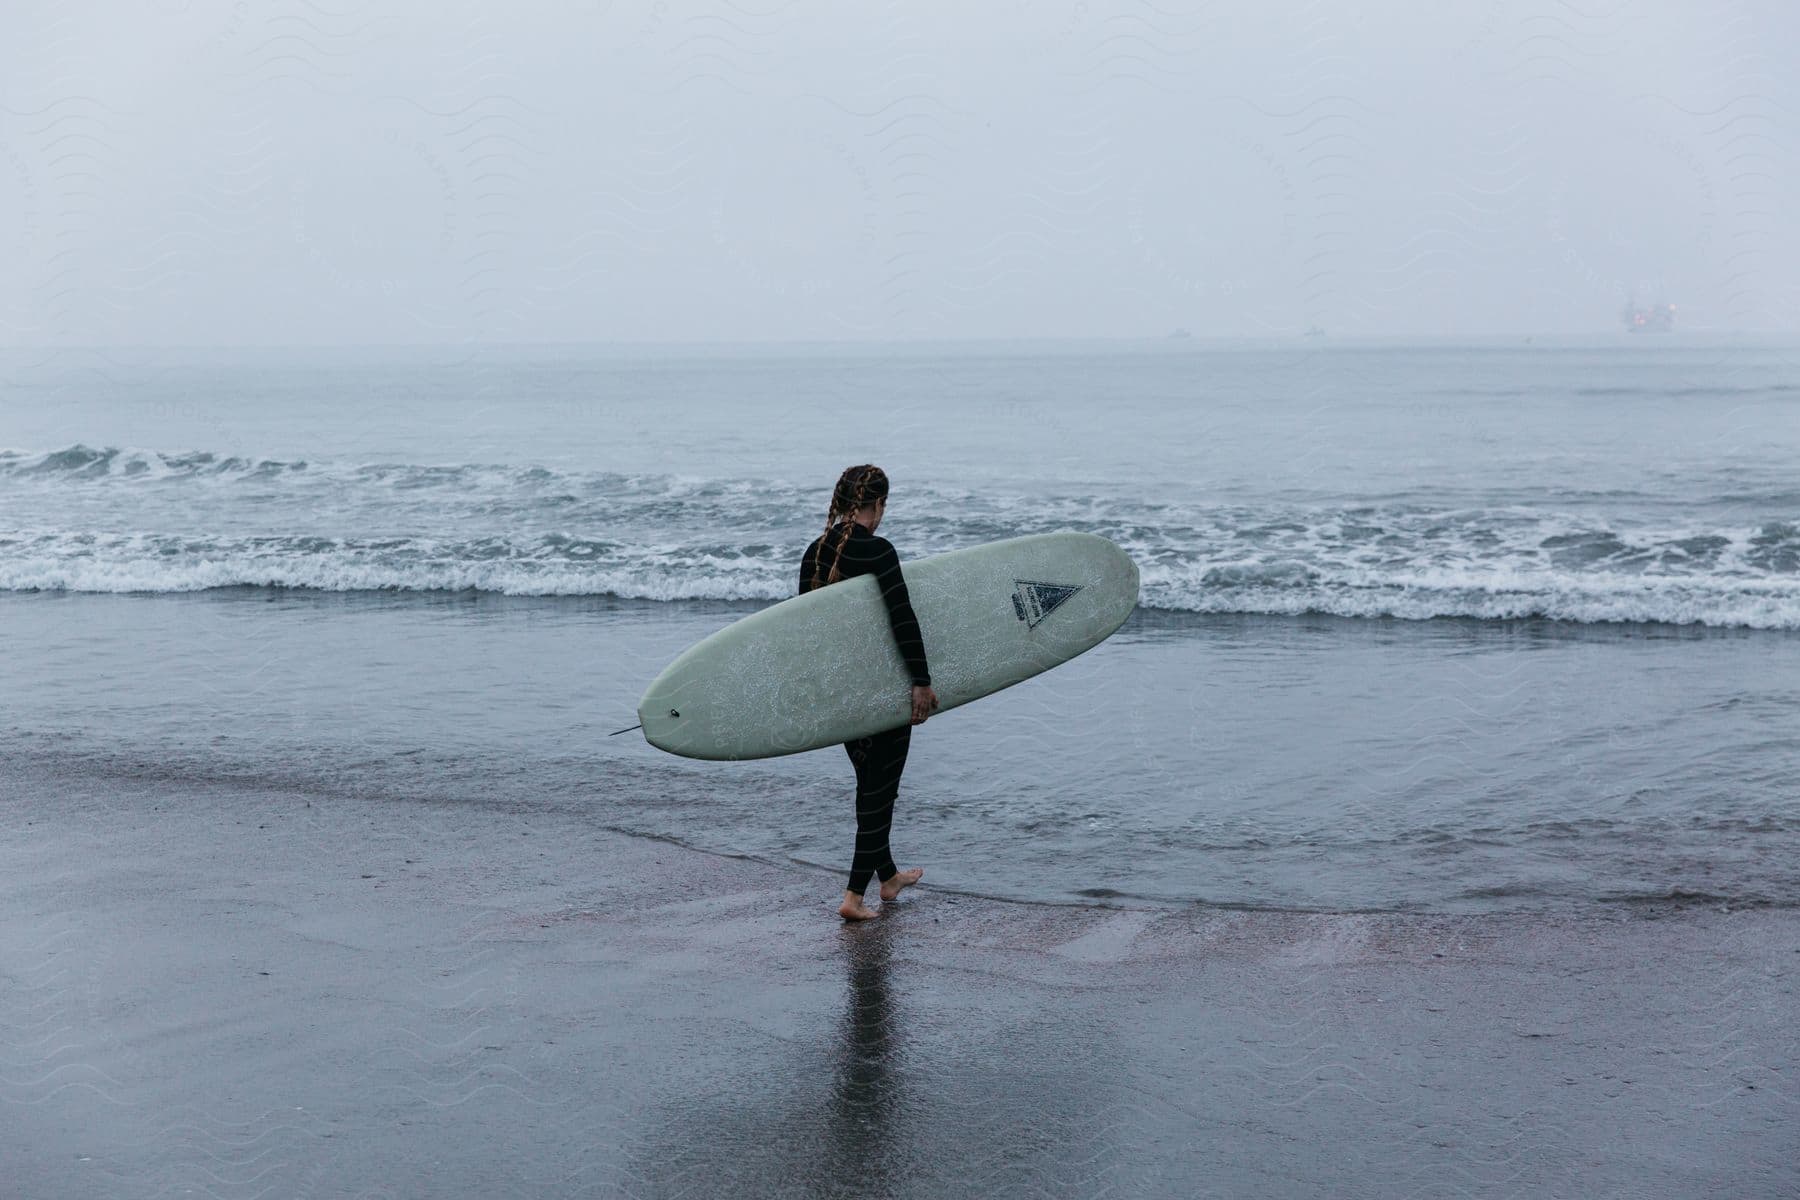 A woman excitedly walks towards the beach holding a surfboard under a cloudy sky